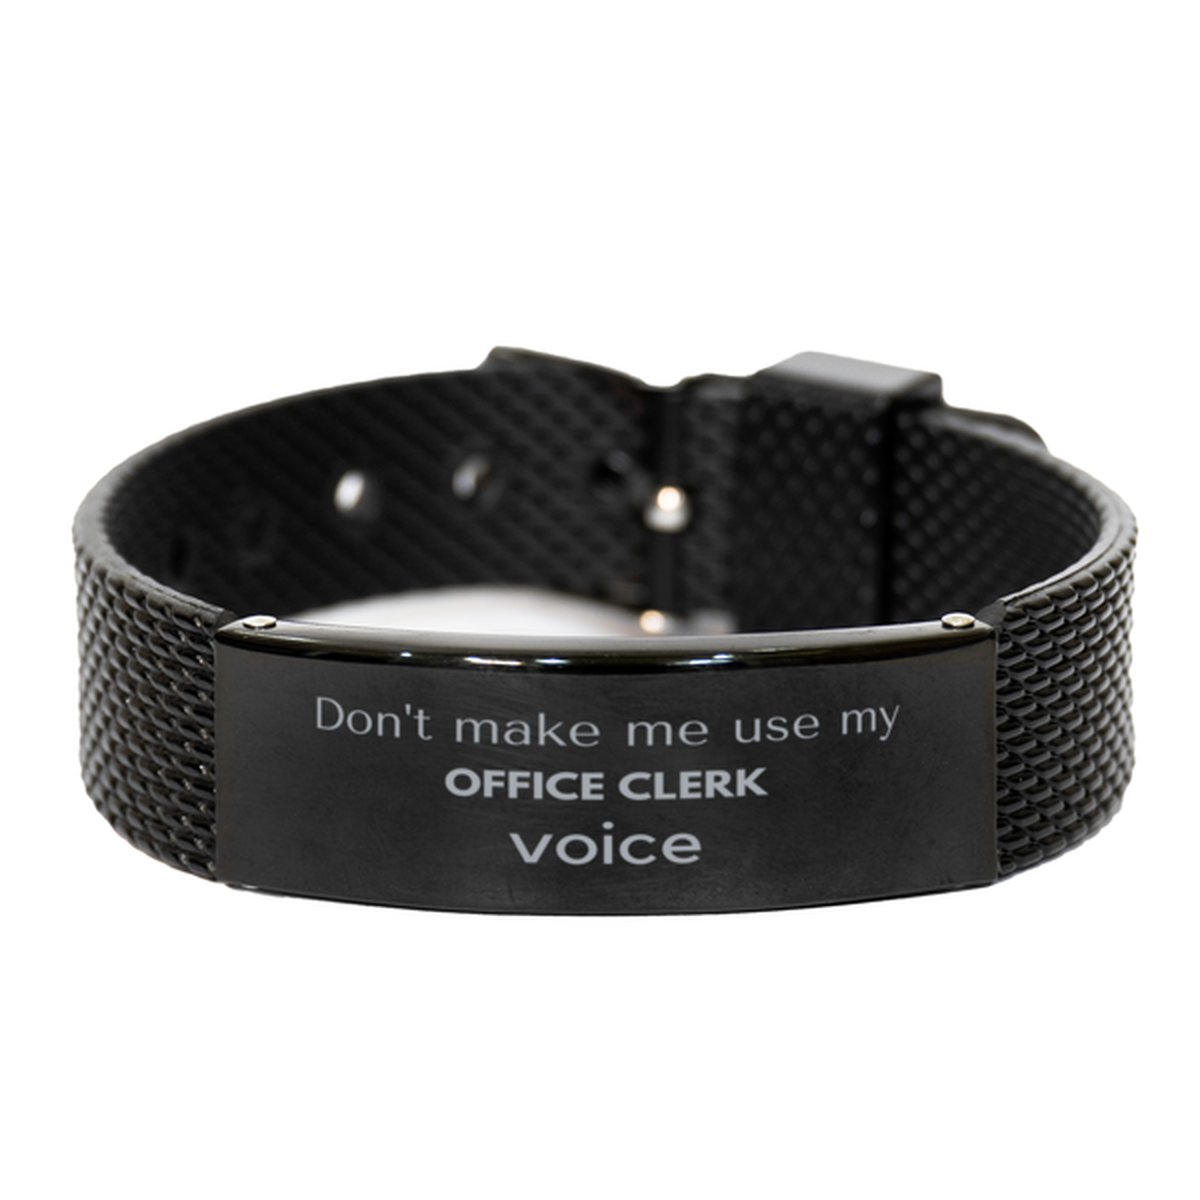 Don't make me use my Office Clerk voice, Sarcasm Office Clerk Gifts, Christmas Office Clerk Black Shark Mesh Bracelet Birthday Unique Gifts For Office Clerk Coworkers, Men, Women, Colleague, Friends